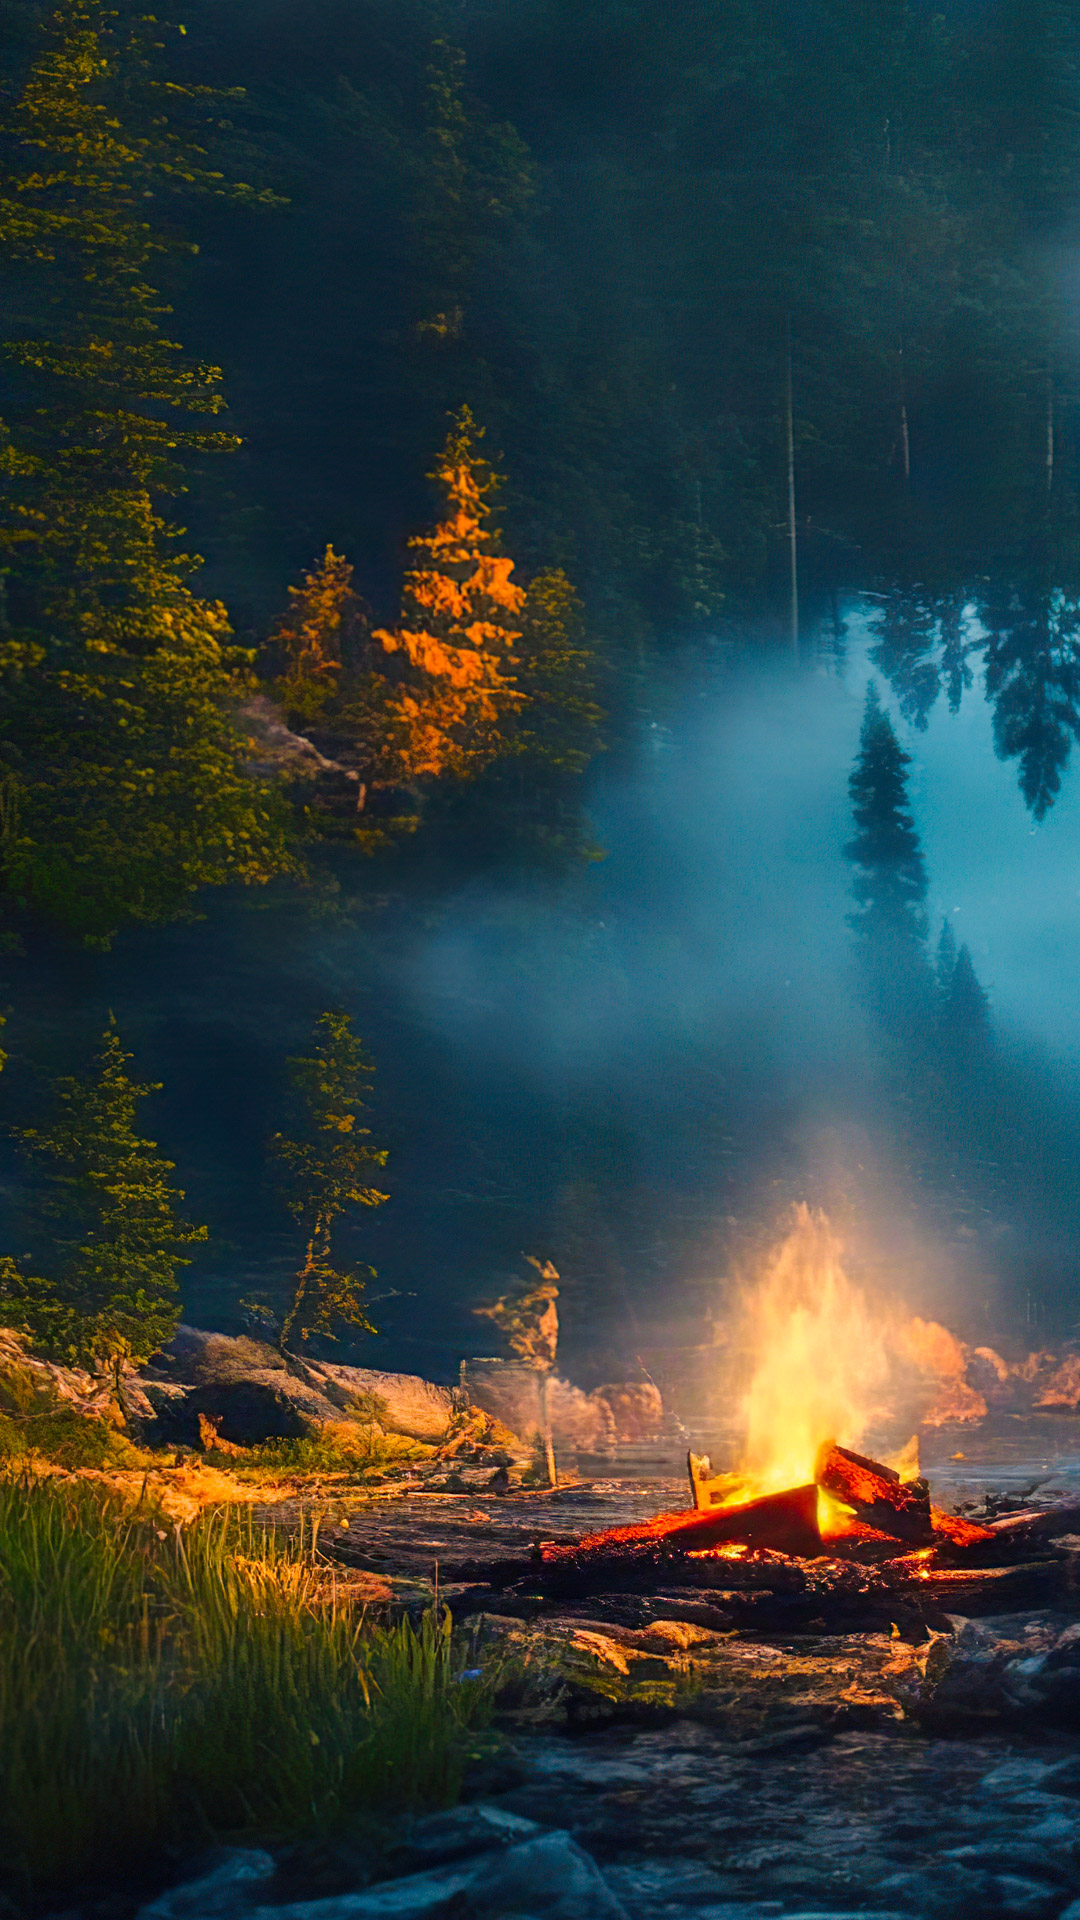 Get lost in the serenity with our cool nature wallpaper, depicting a serene lakeside campsite with a flickering campfire, surrounded by a dark, wooded wilderness.